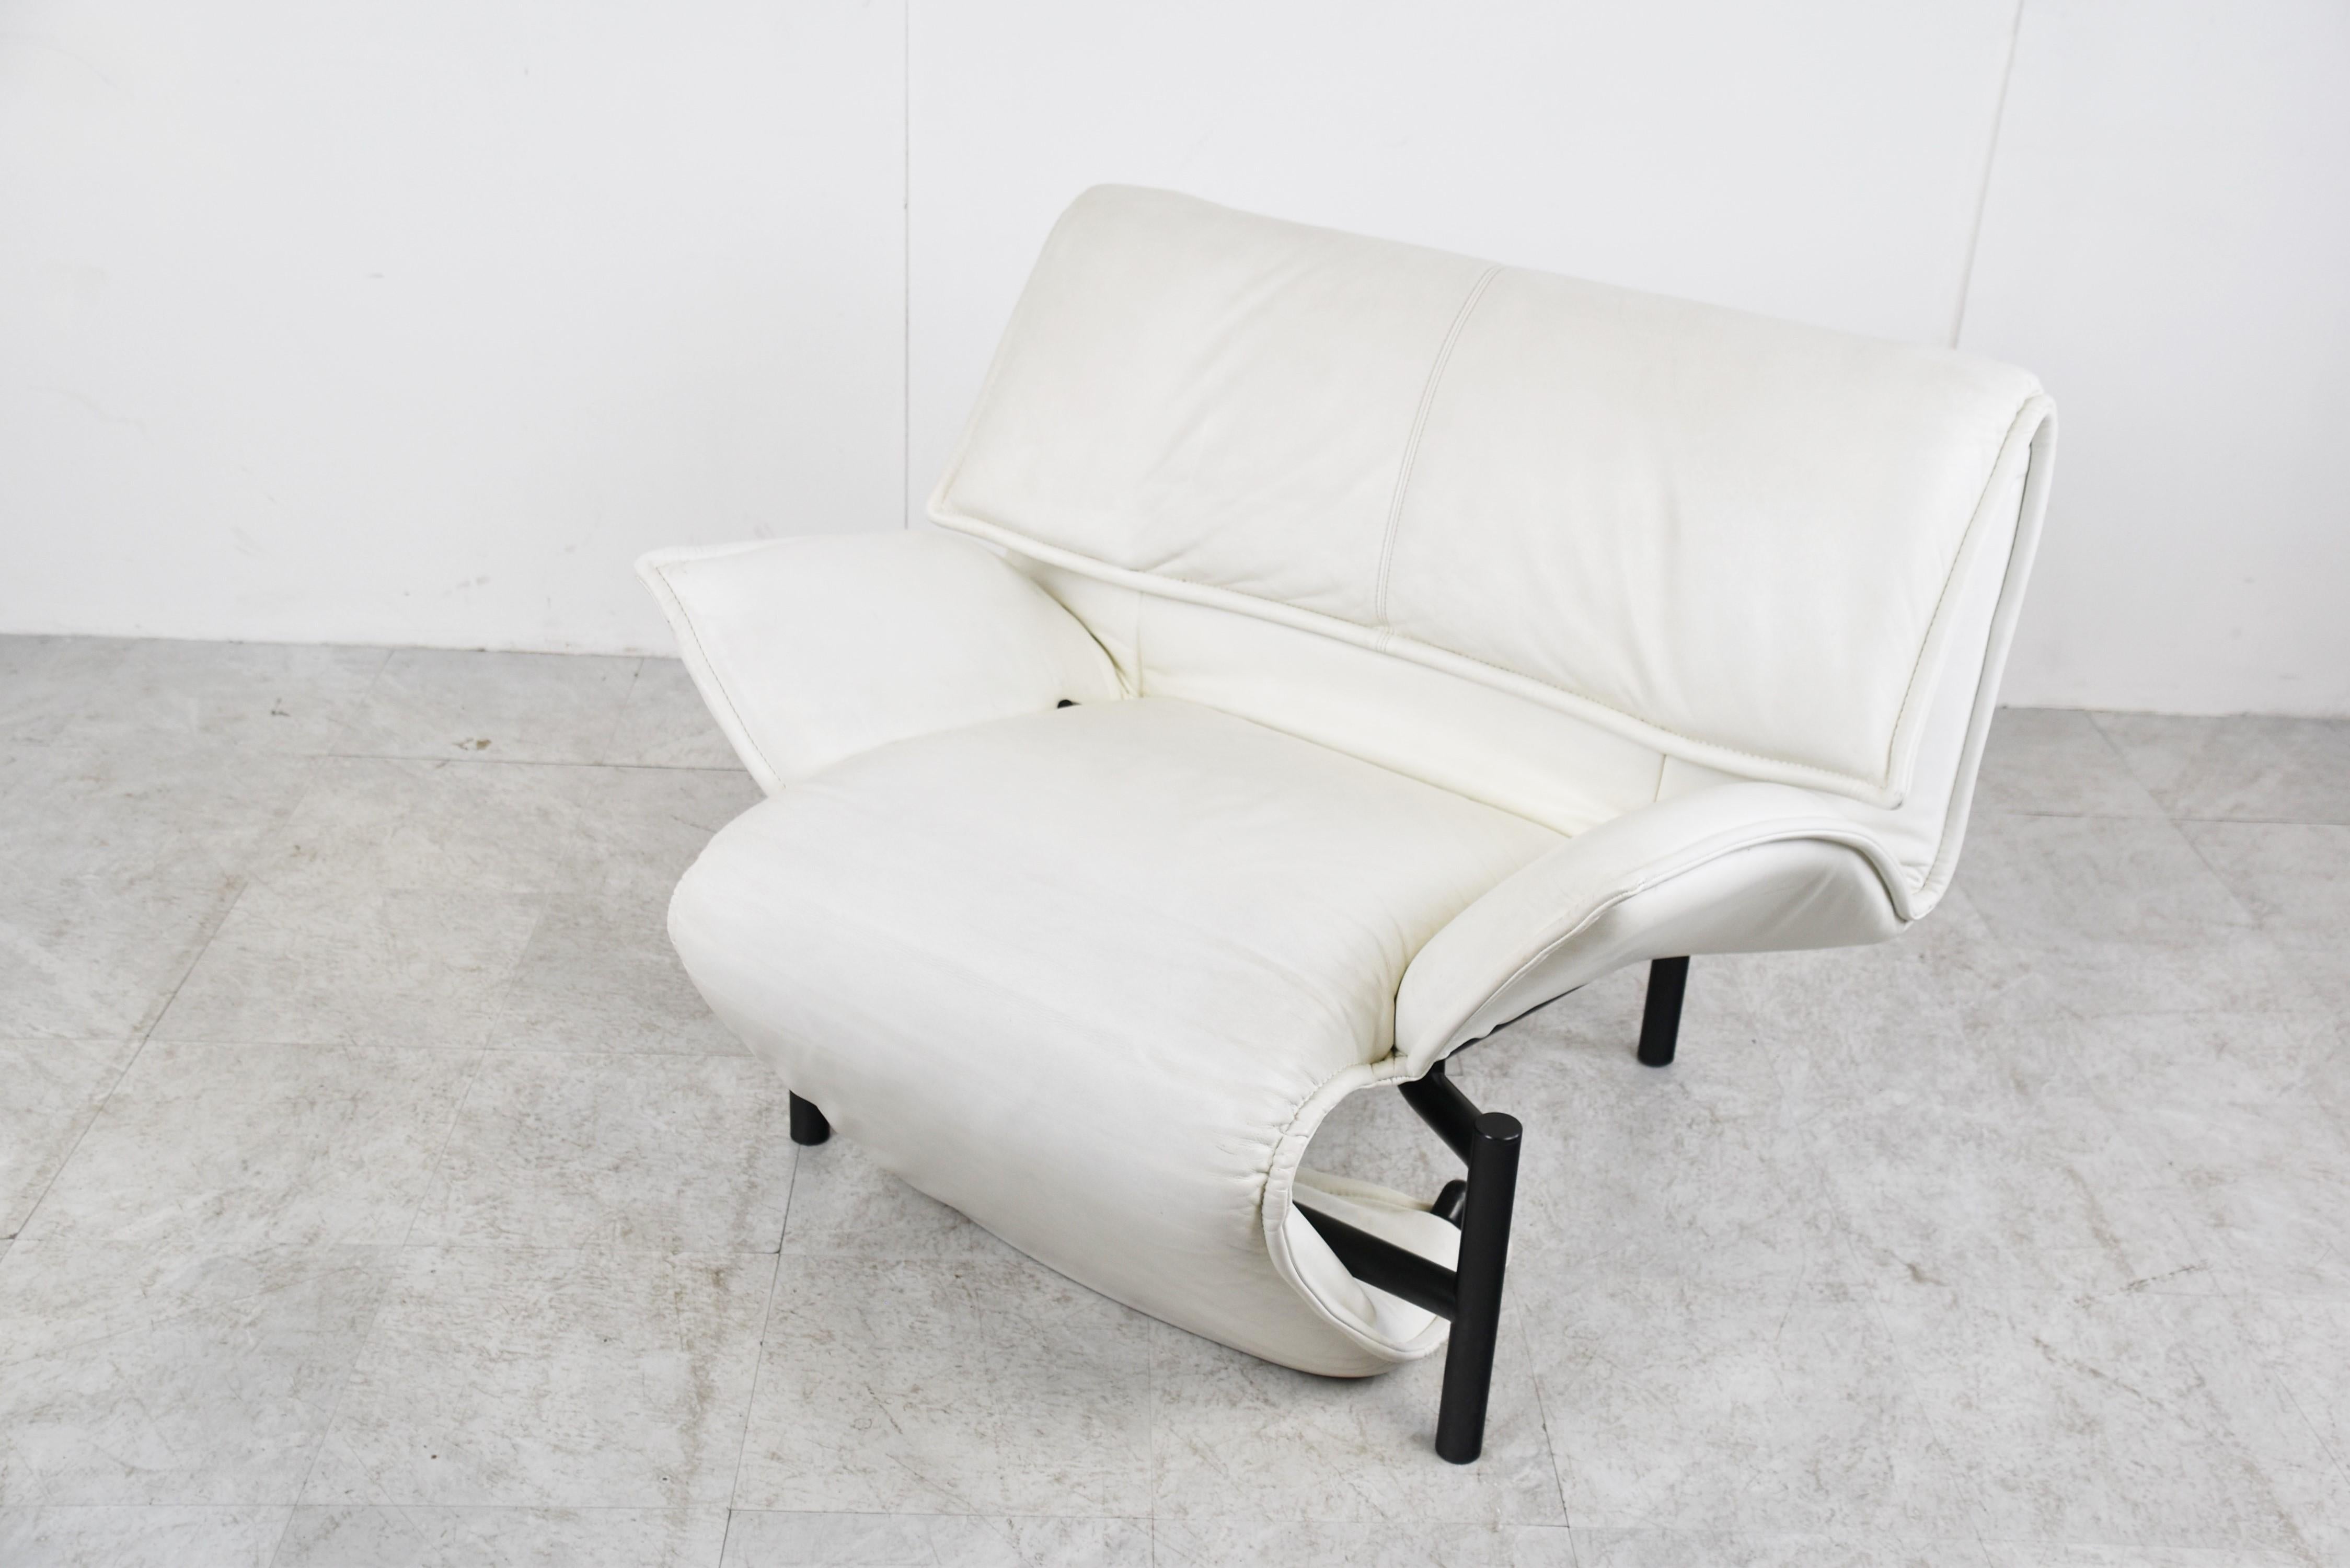 Late 20th Century Vintage Leather Veranda Lounge Chair by Vico Magistretti for Cassina, 1980s For Sale